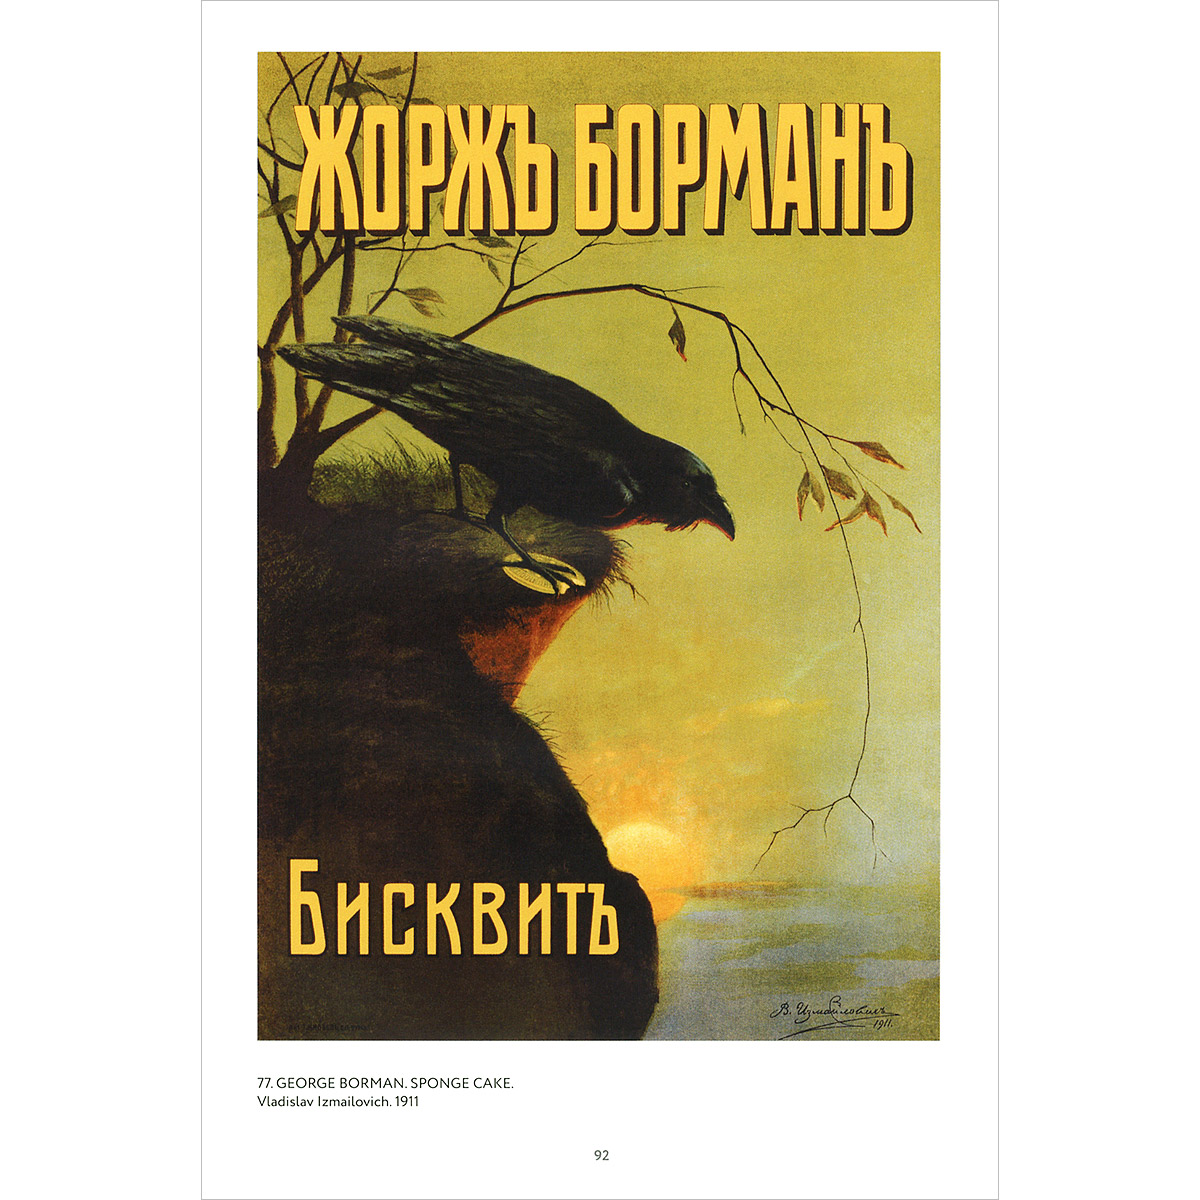   . 1868-1917 / Russian Advertising Posters: 1868-1917